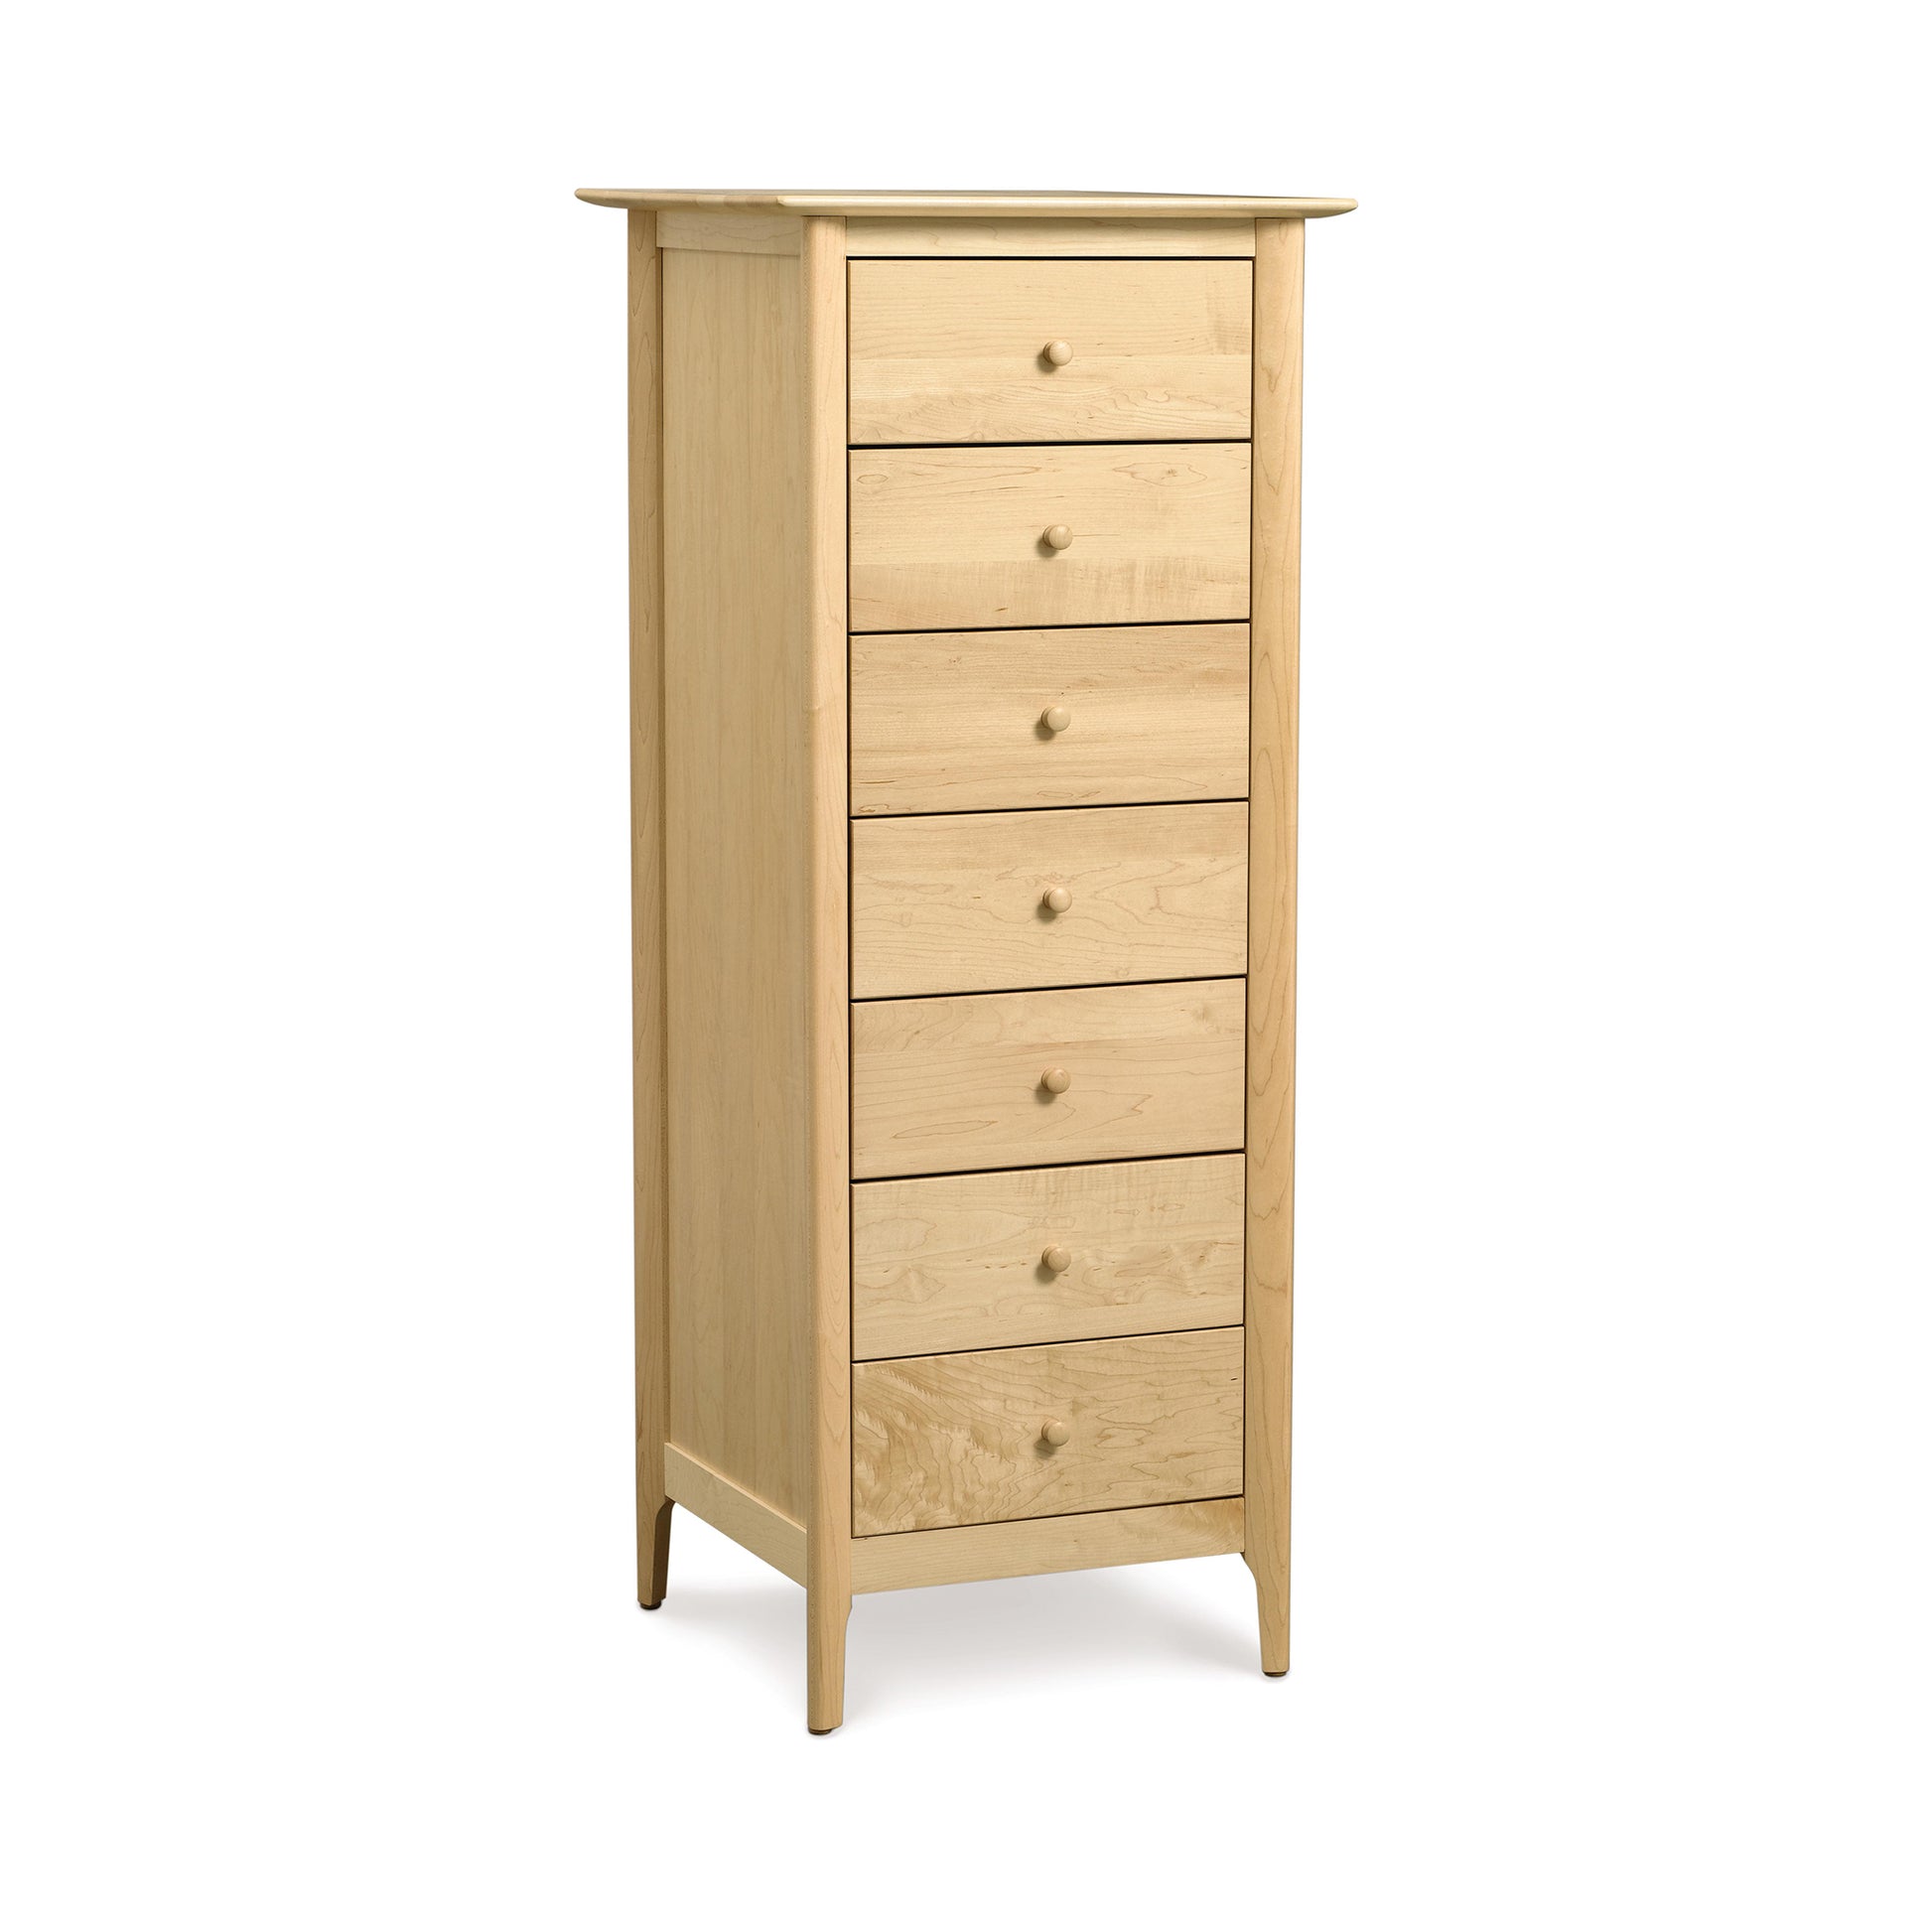 A tall, narrow Copeland Furniture Sarah 7-Drawer Lingerie Chest, isolated on a white background.